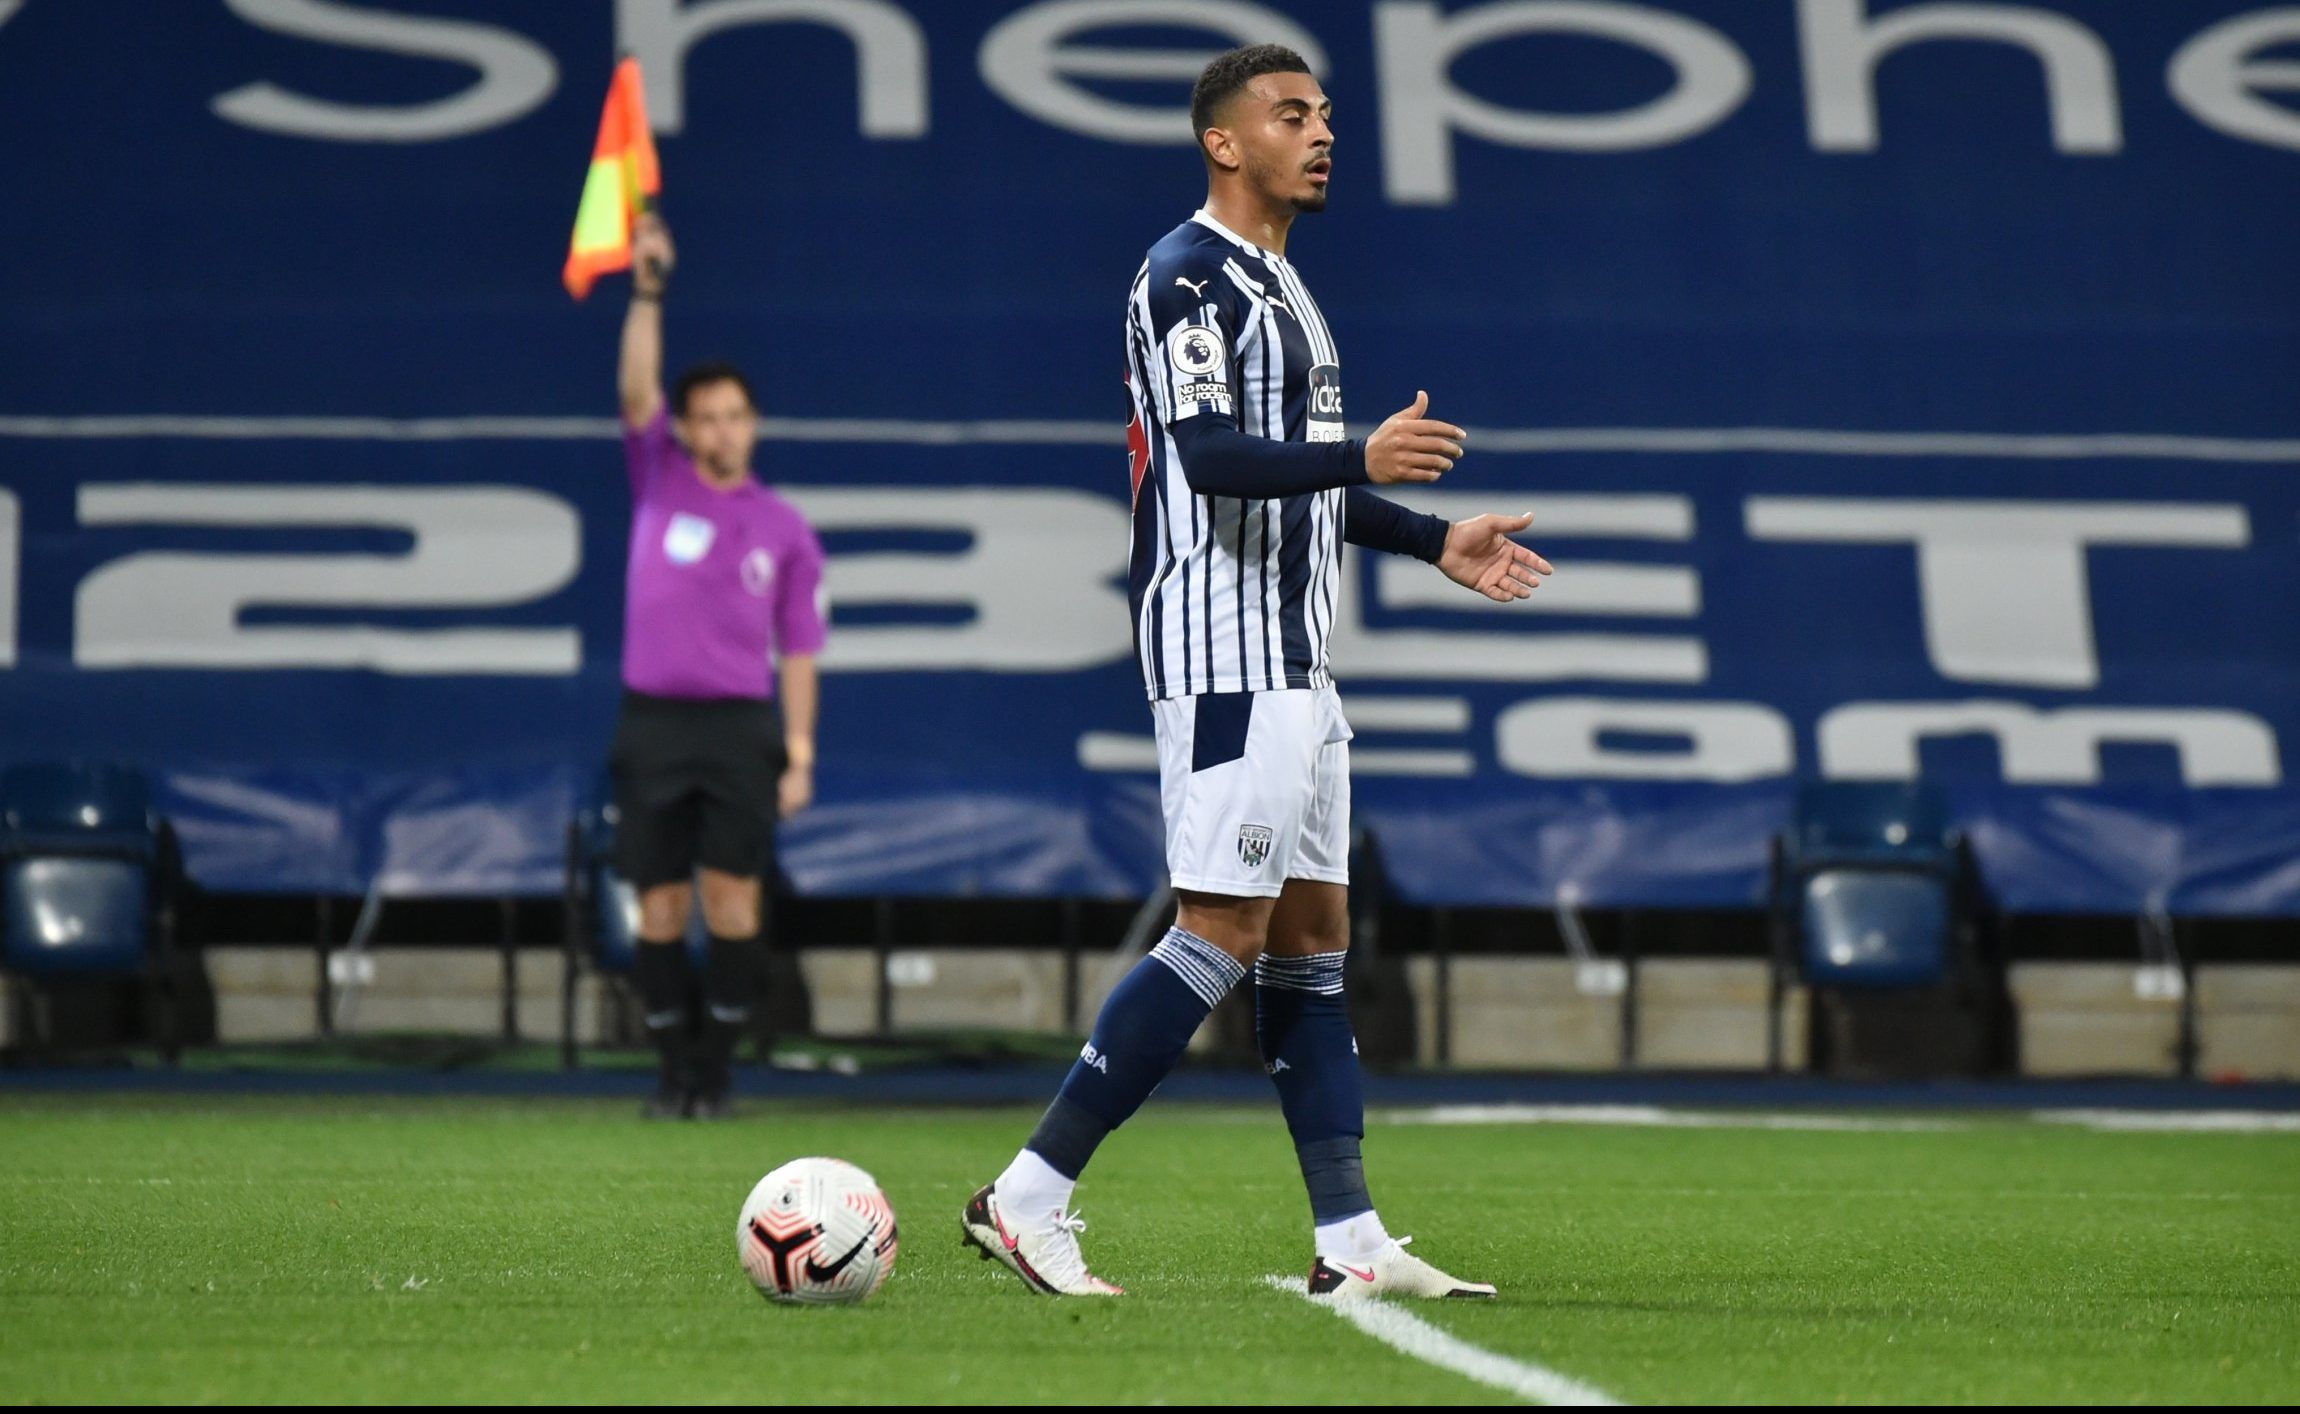 West Brom summer signing Karlan Grant